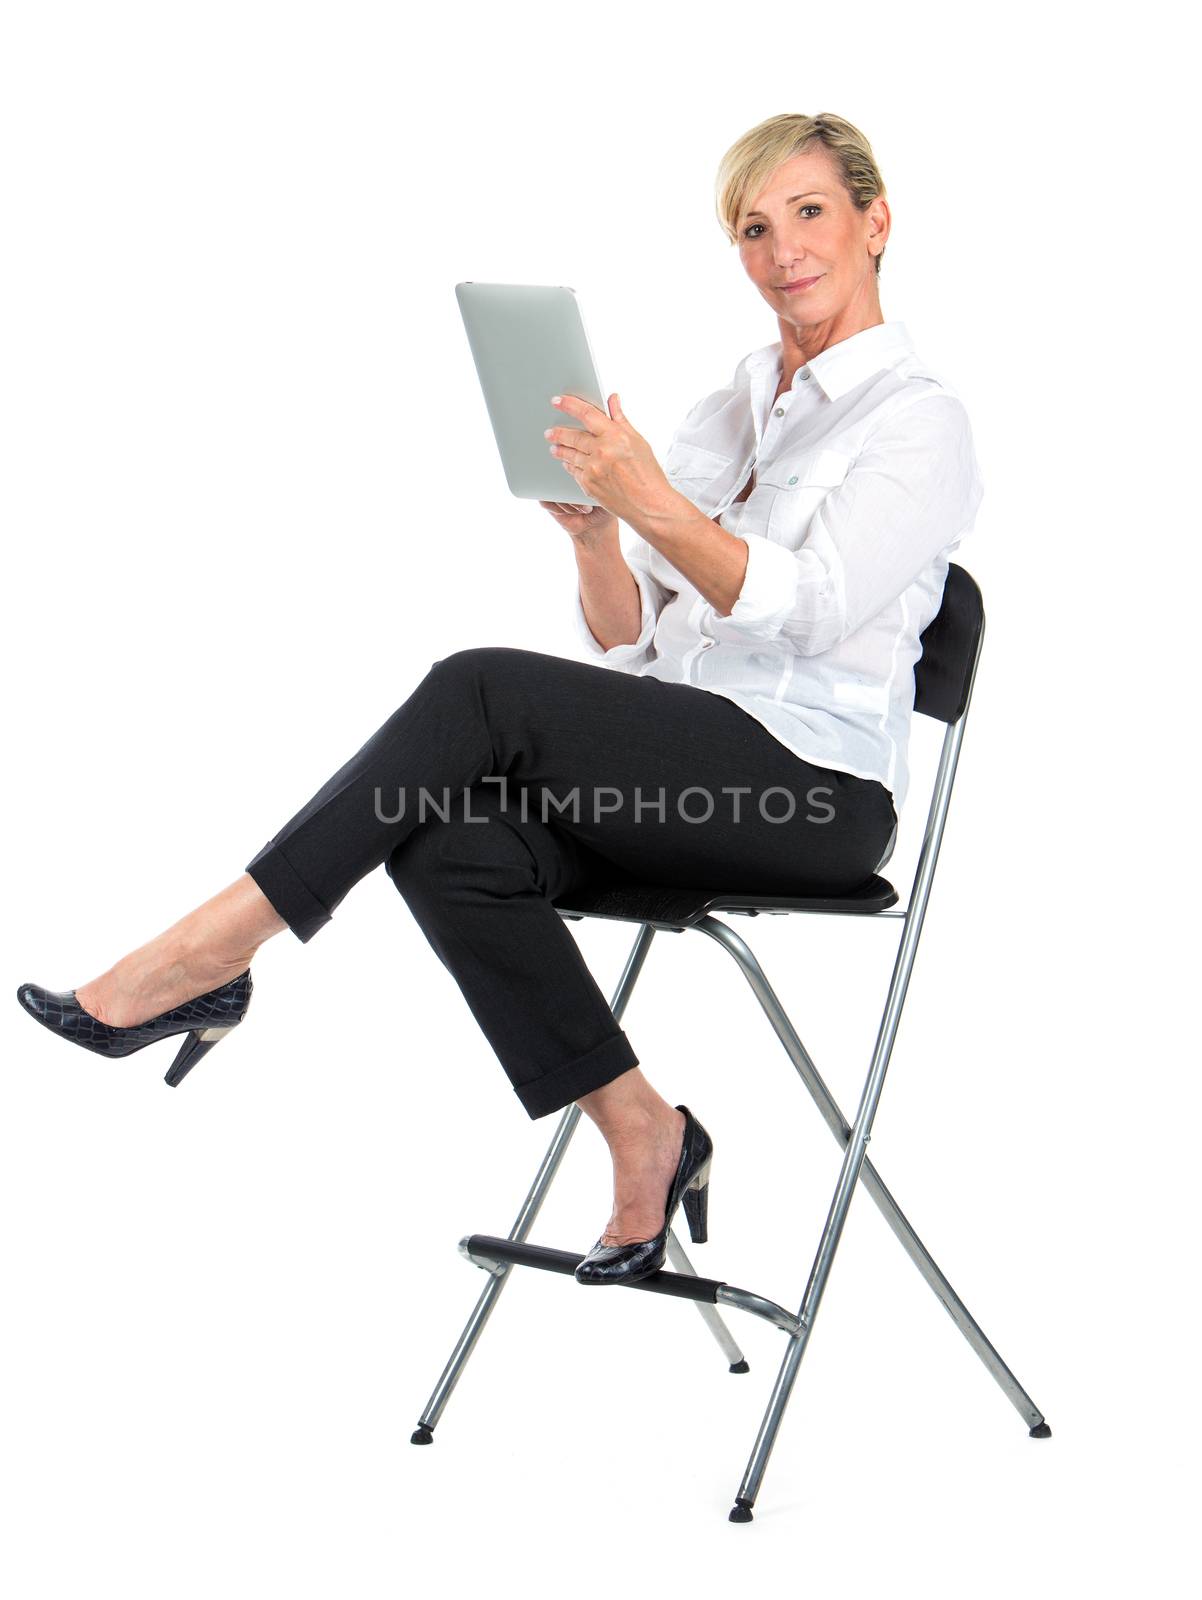 manager woman working with ipad